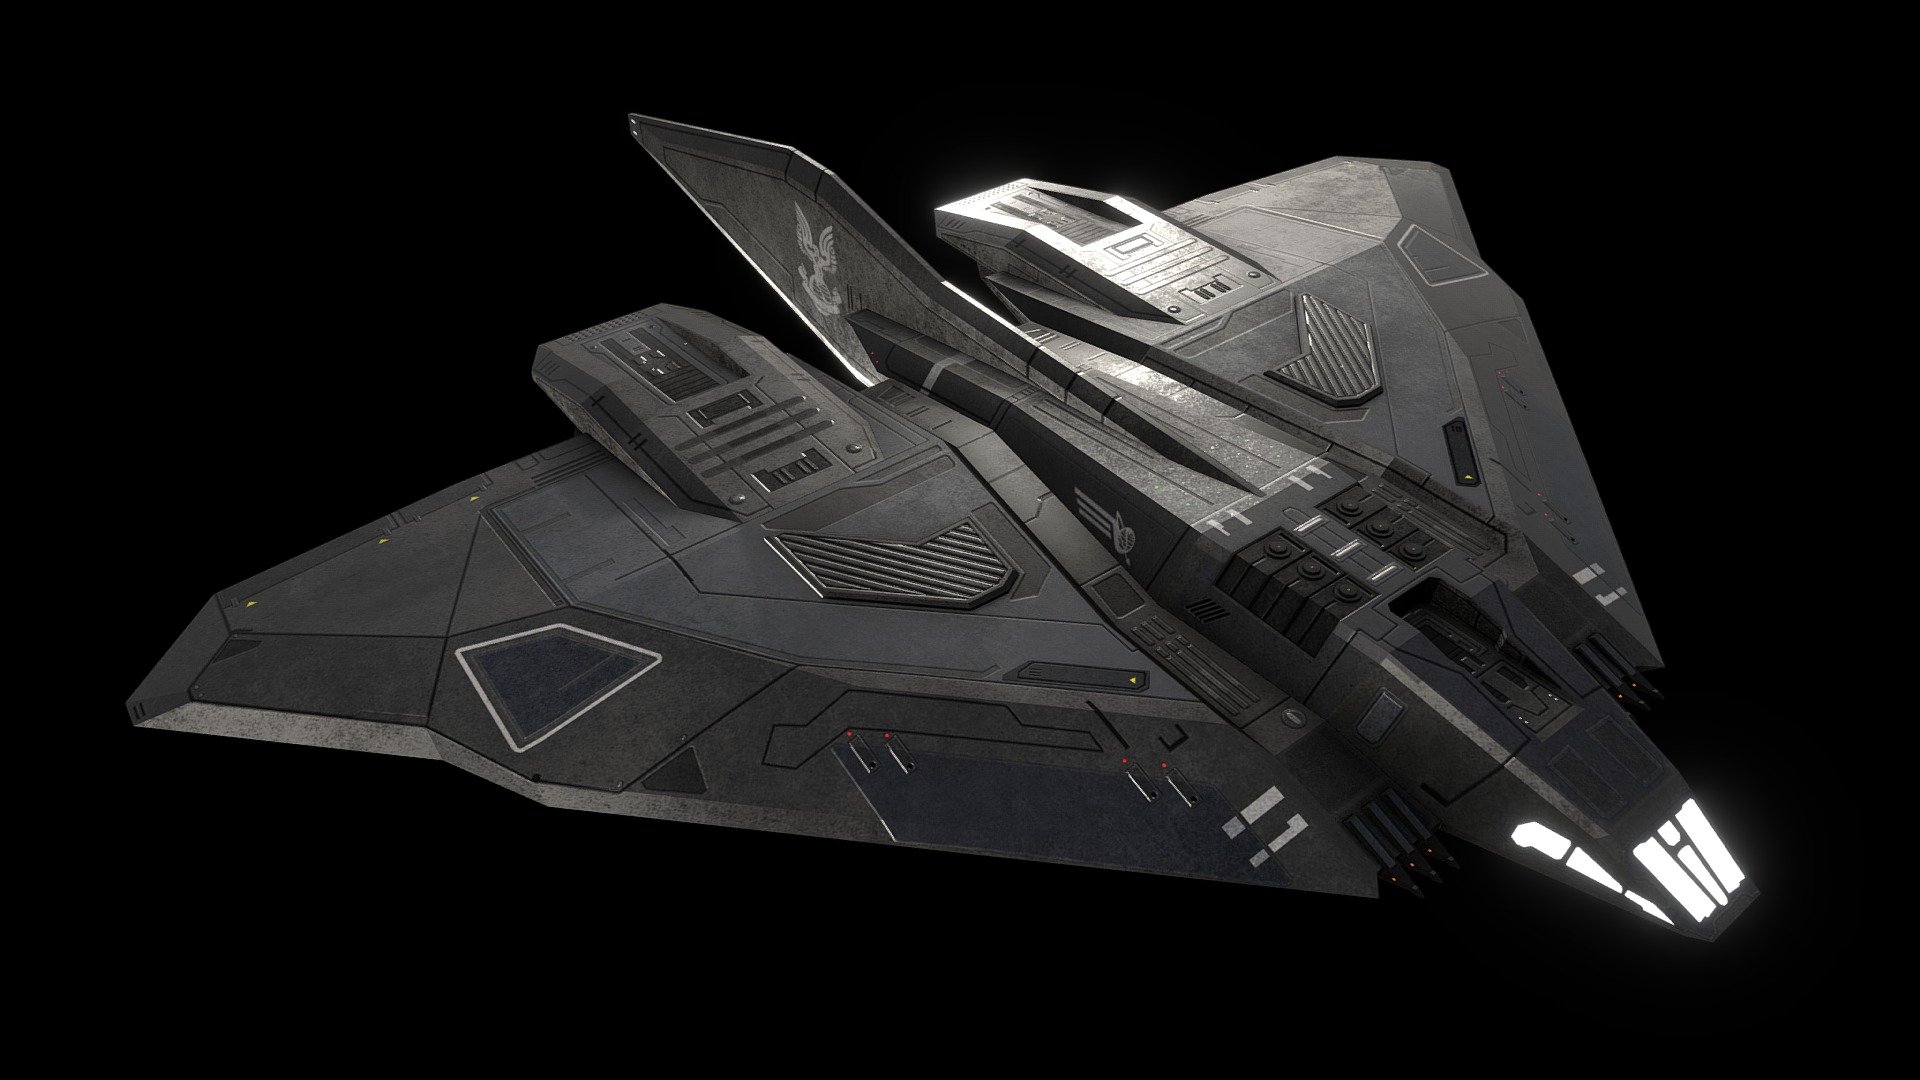 Recently I took an opportunity to redo a couple of our older starfighter assets in Sins of the Prophets, starting with our Longsword fighters of the UNSC faction. This particular model is of the smaller Longsword variant known as the &ldquo;C-712